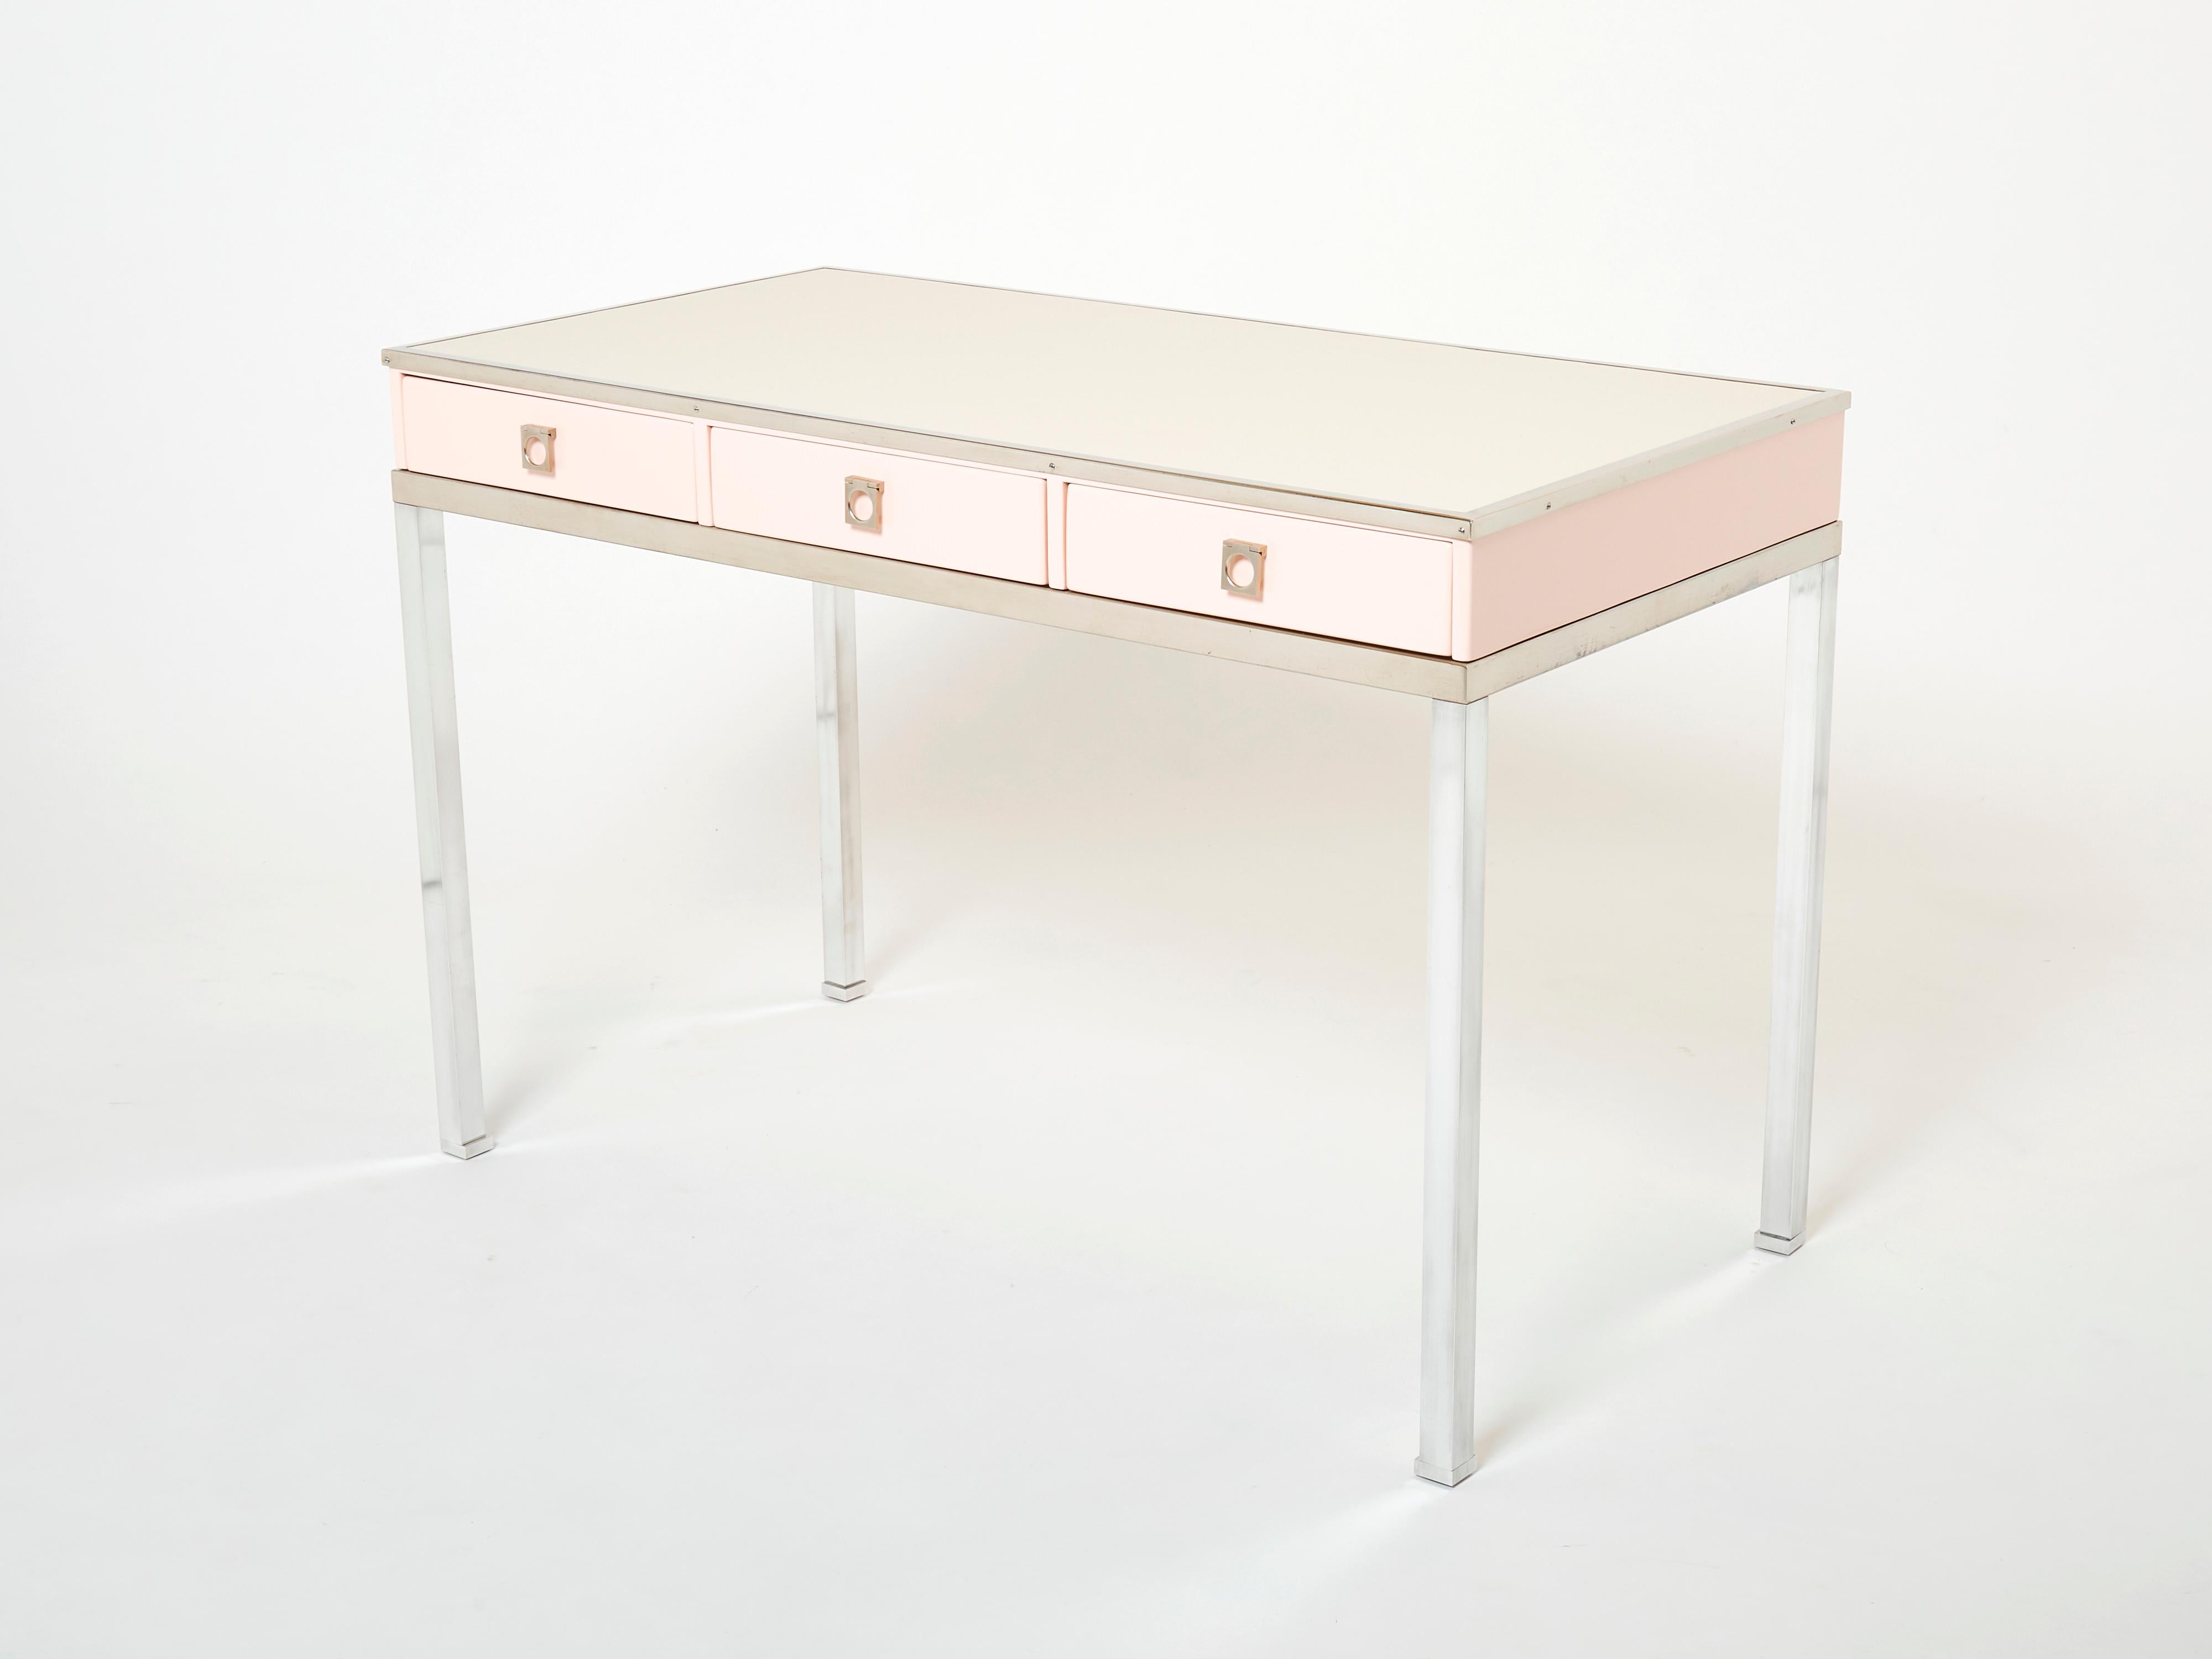 A rare Maison Jansen dusty rose lacquered desk table designed by Guy Lefevre, it features a simple side off white leatherette top surface and three drawers. Following the glamorous French Mid-century look of other classic Guy Lefevre designs, this